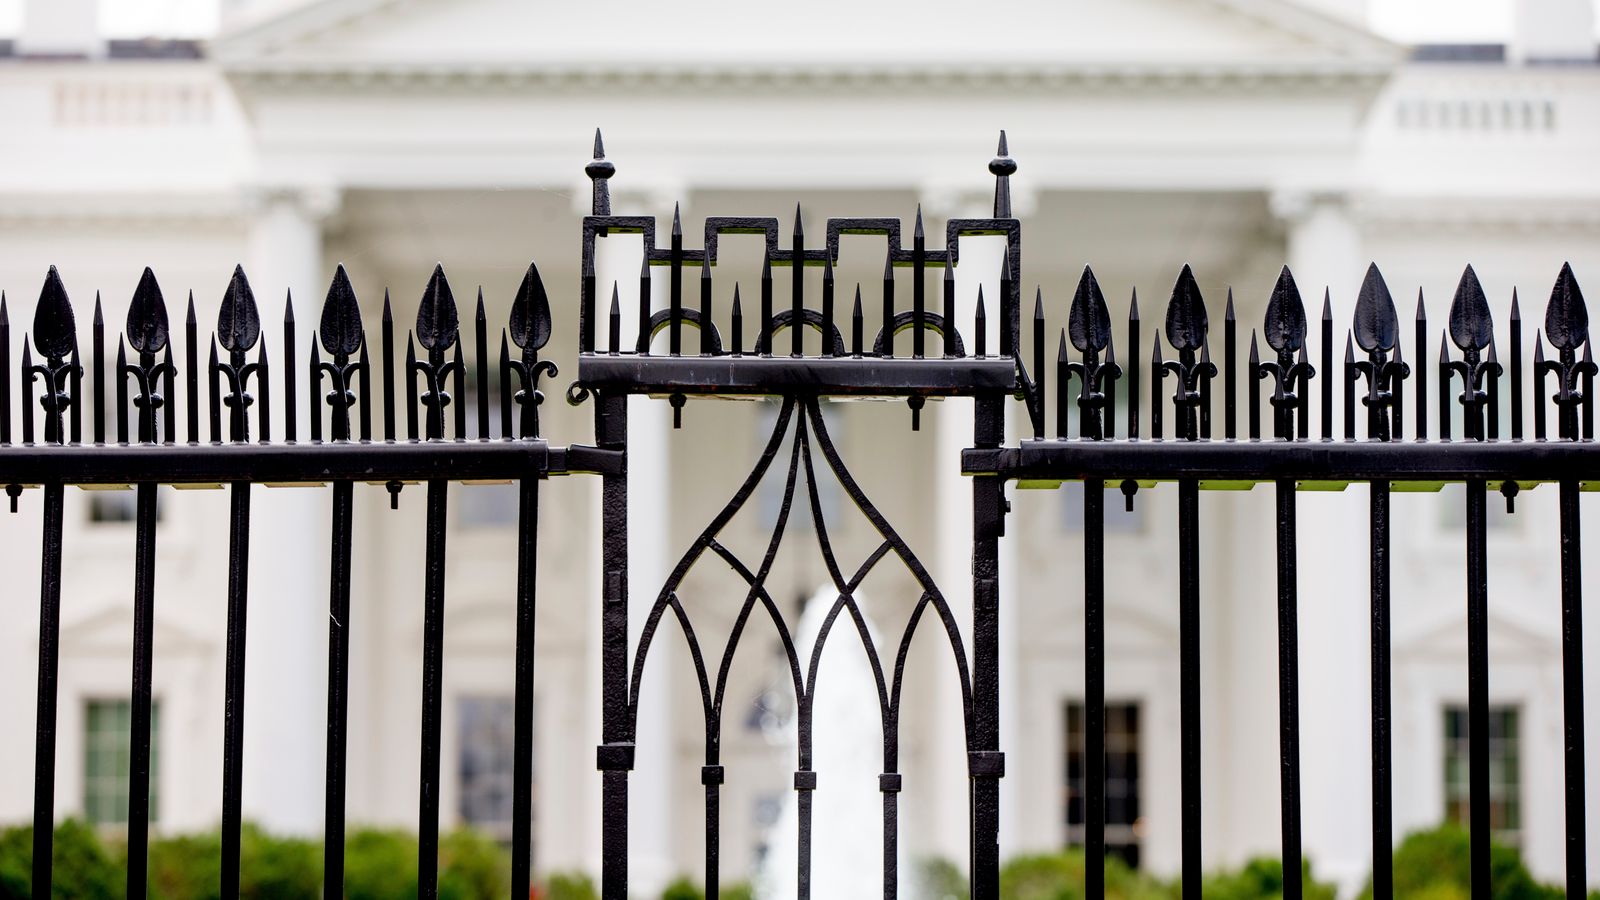 Driver dies after crashing into White House perimeter fence